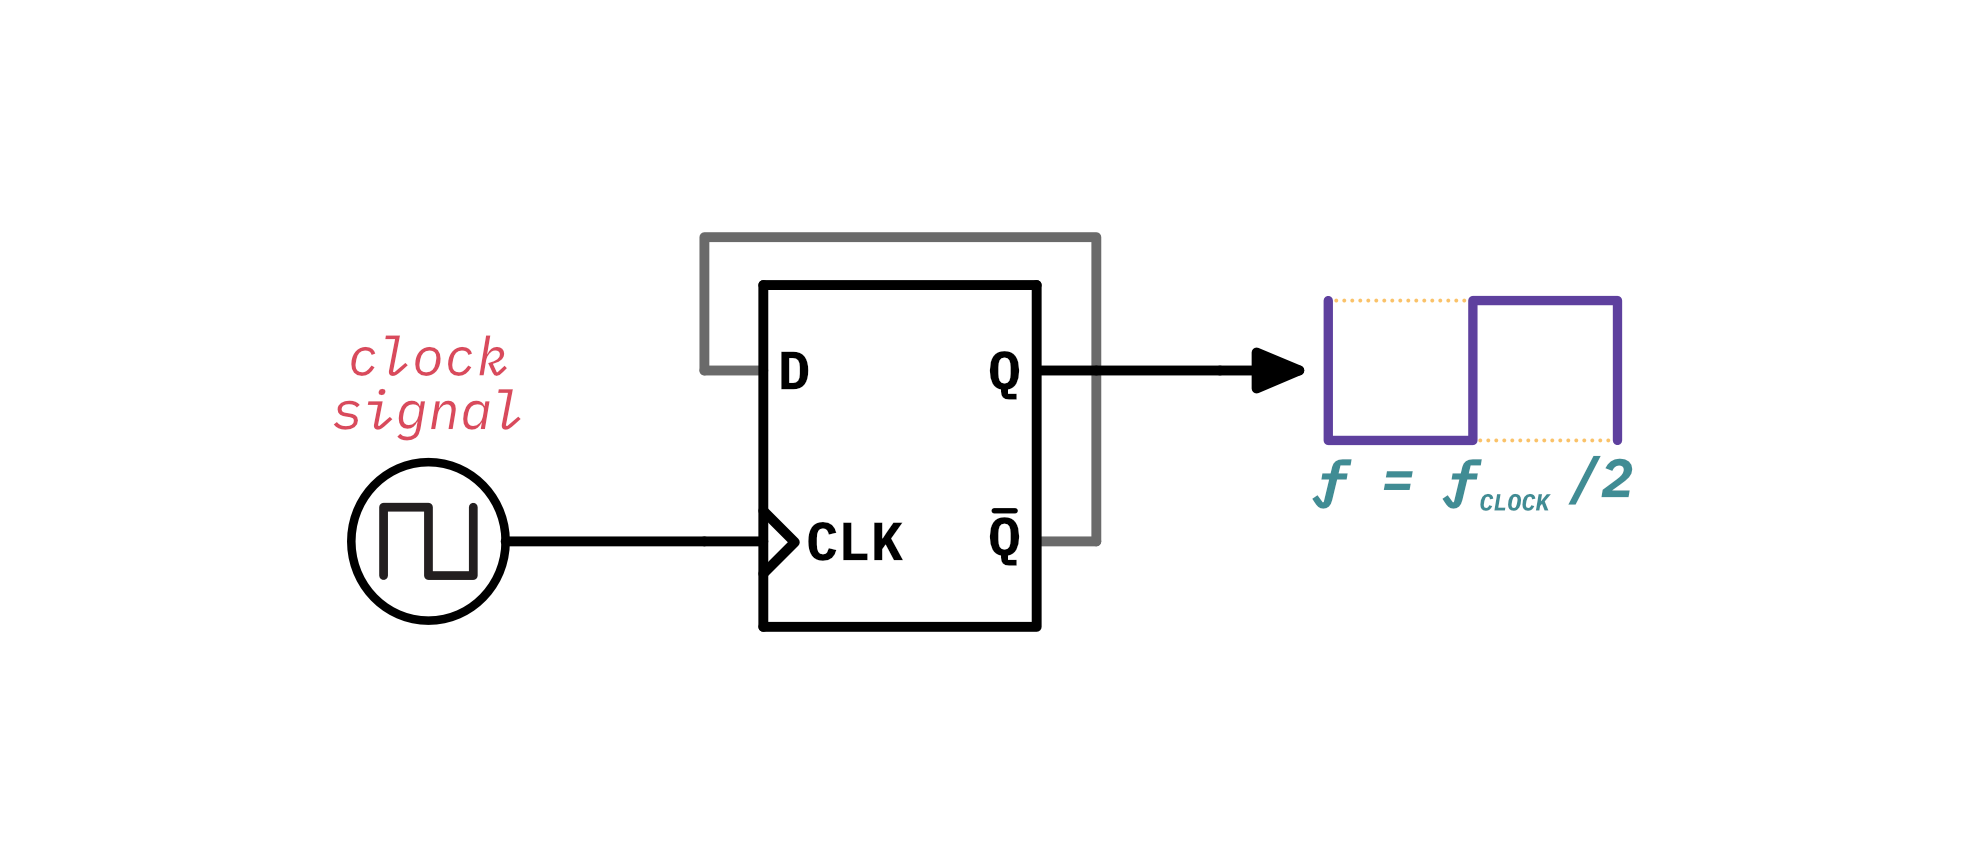 The schematic for the sub waveform using a divide-by-two circuit